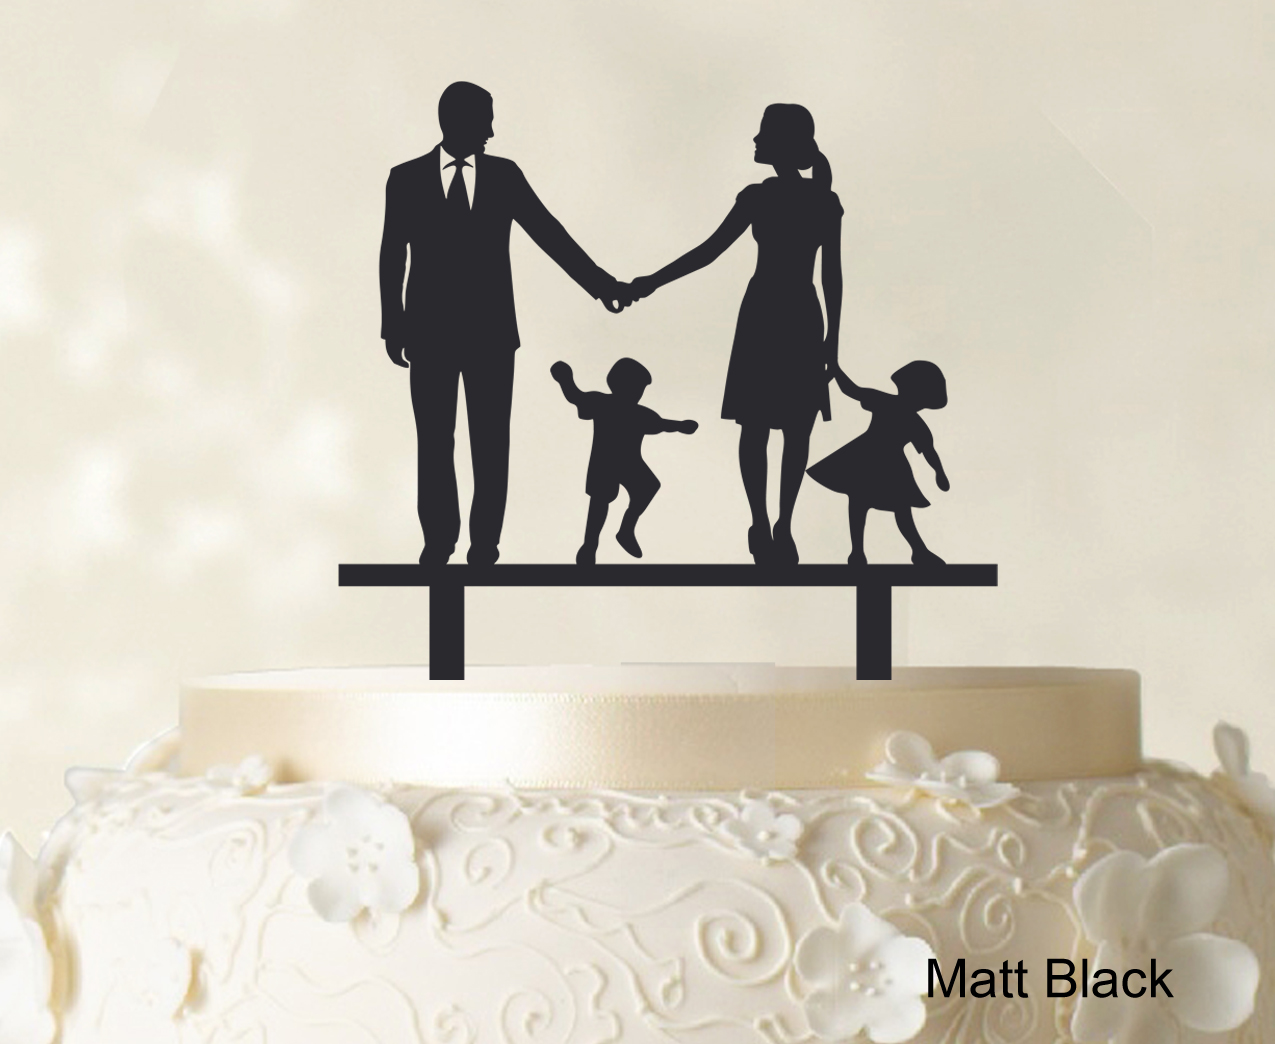 Bride and Groom With Child Family Wedding Cake Topper Cake Decoration Acrylic 